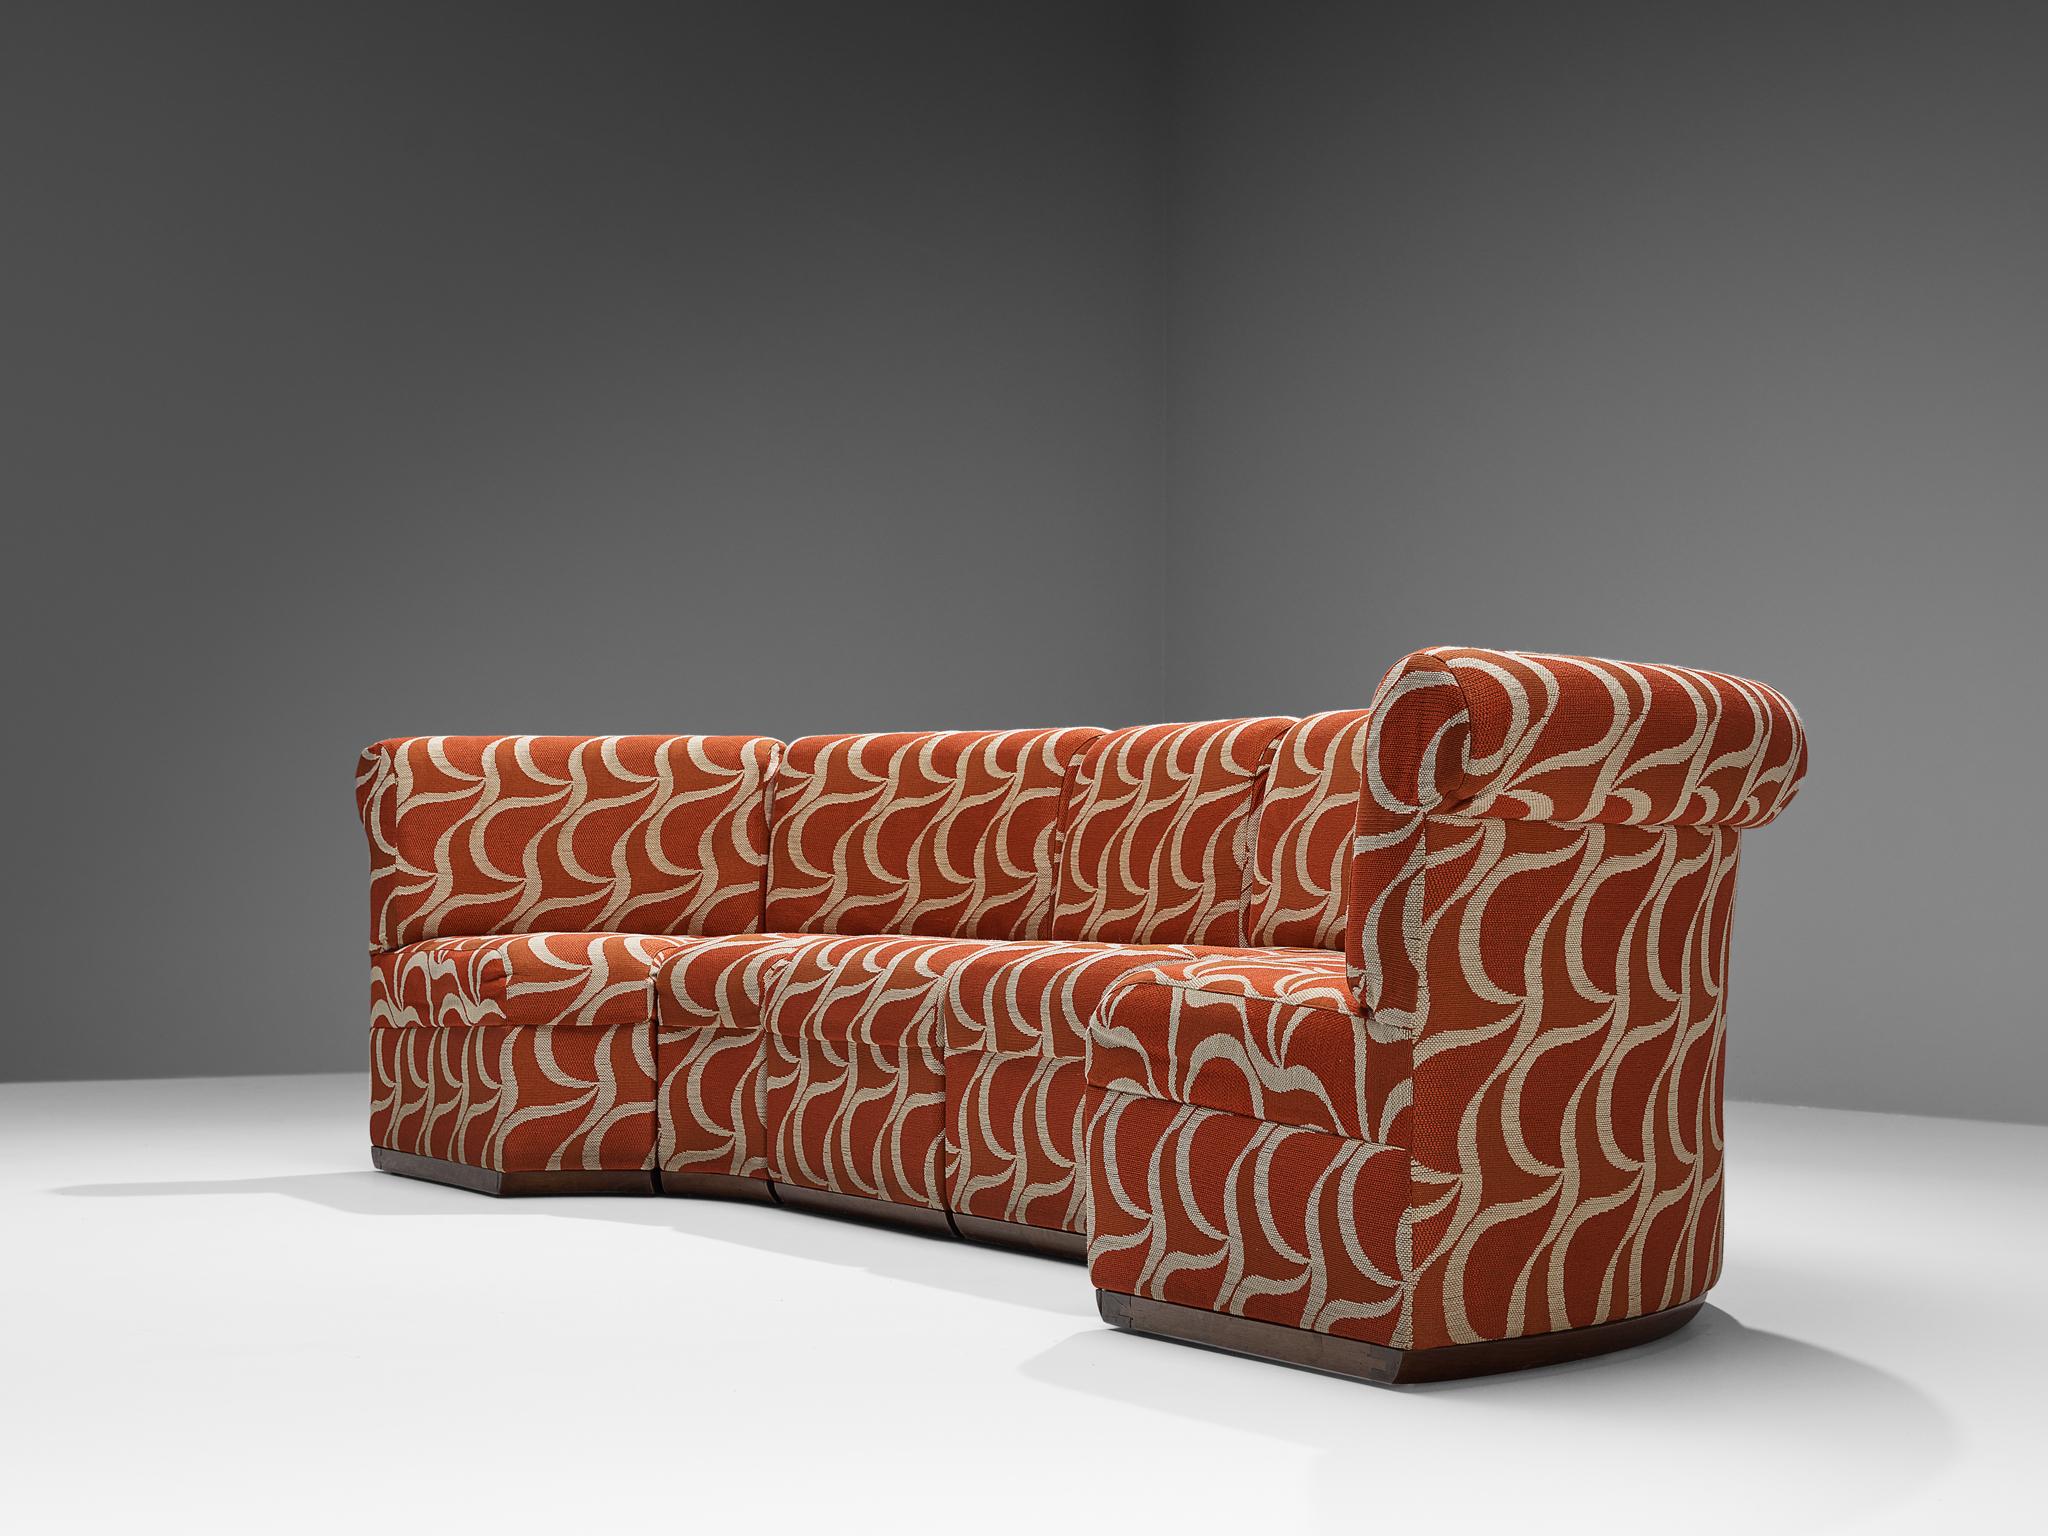 Post-Modern Italian Sectional Sofa in Red Orange Patterned Upholstery  For Sale